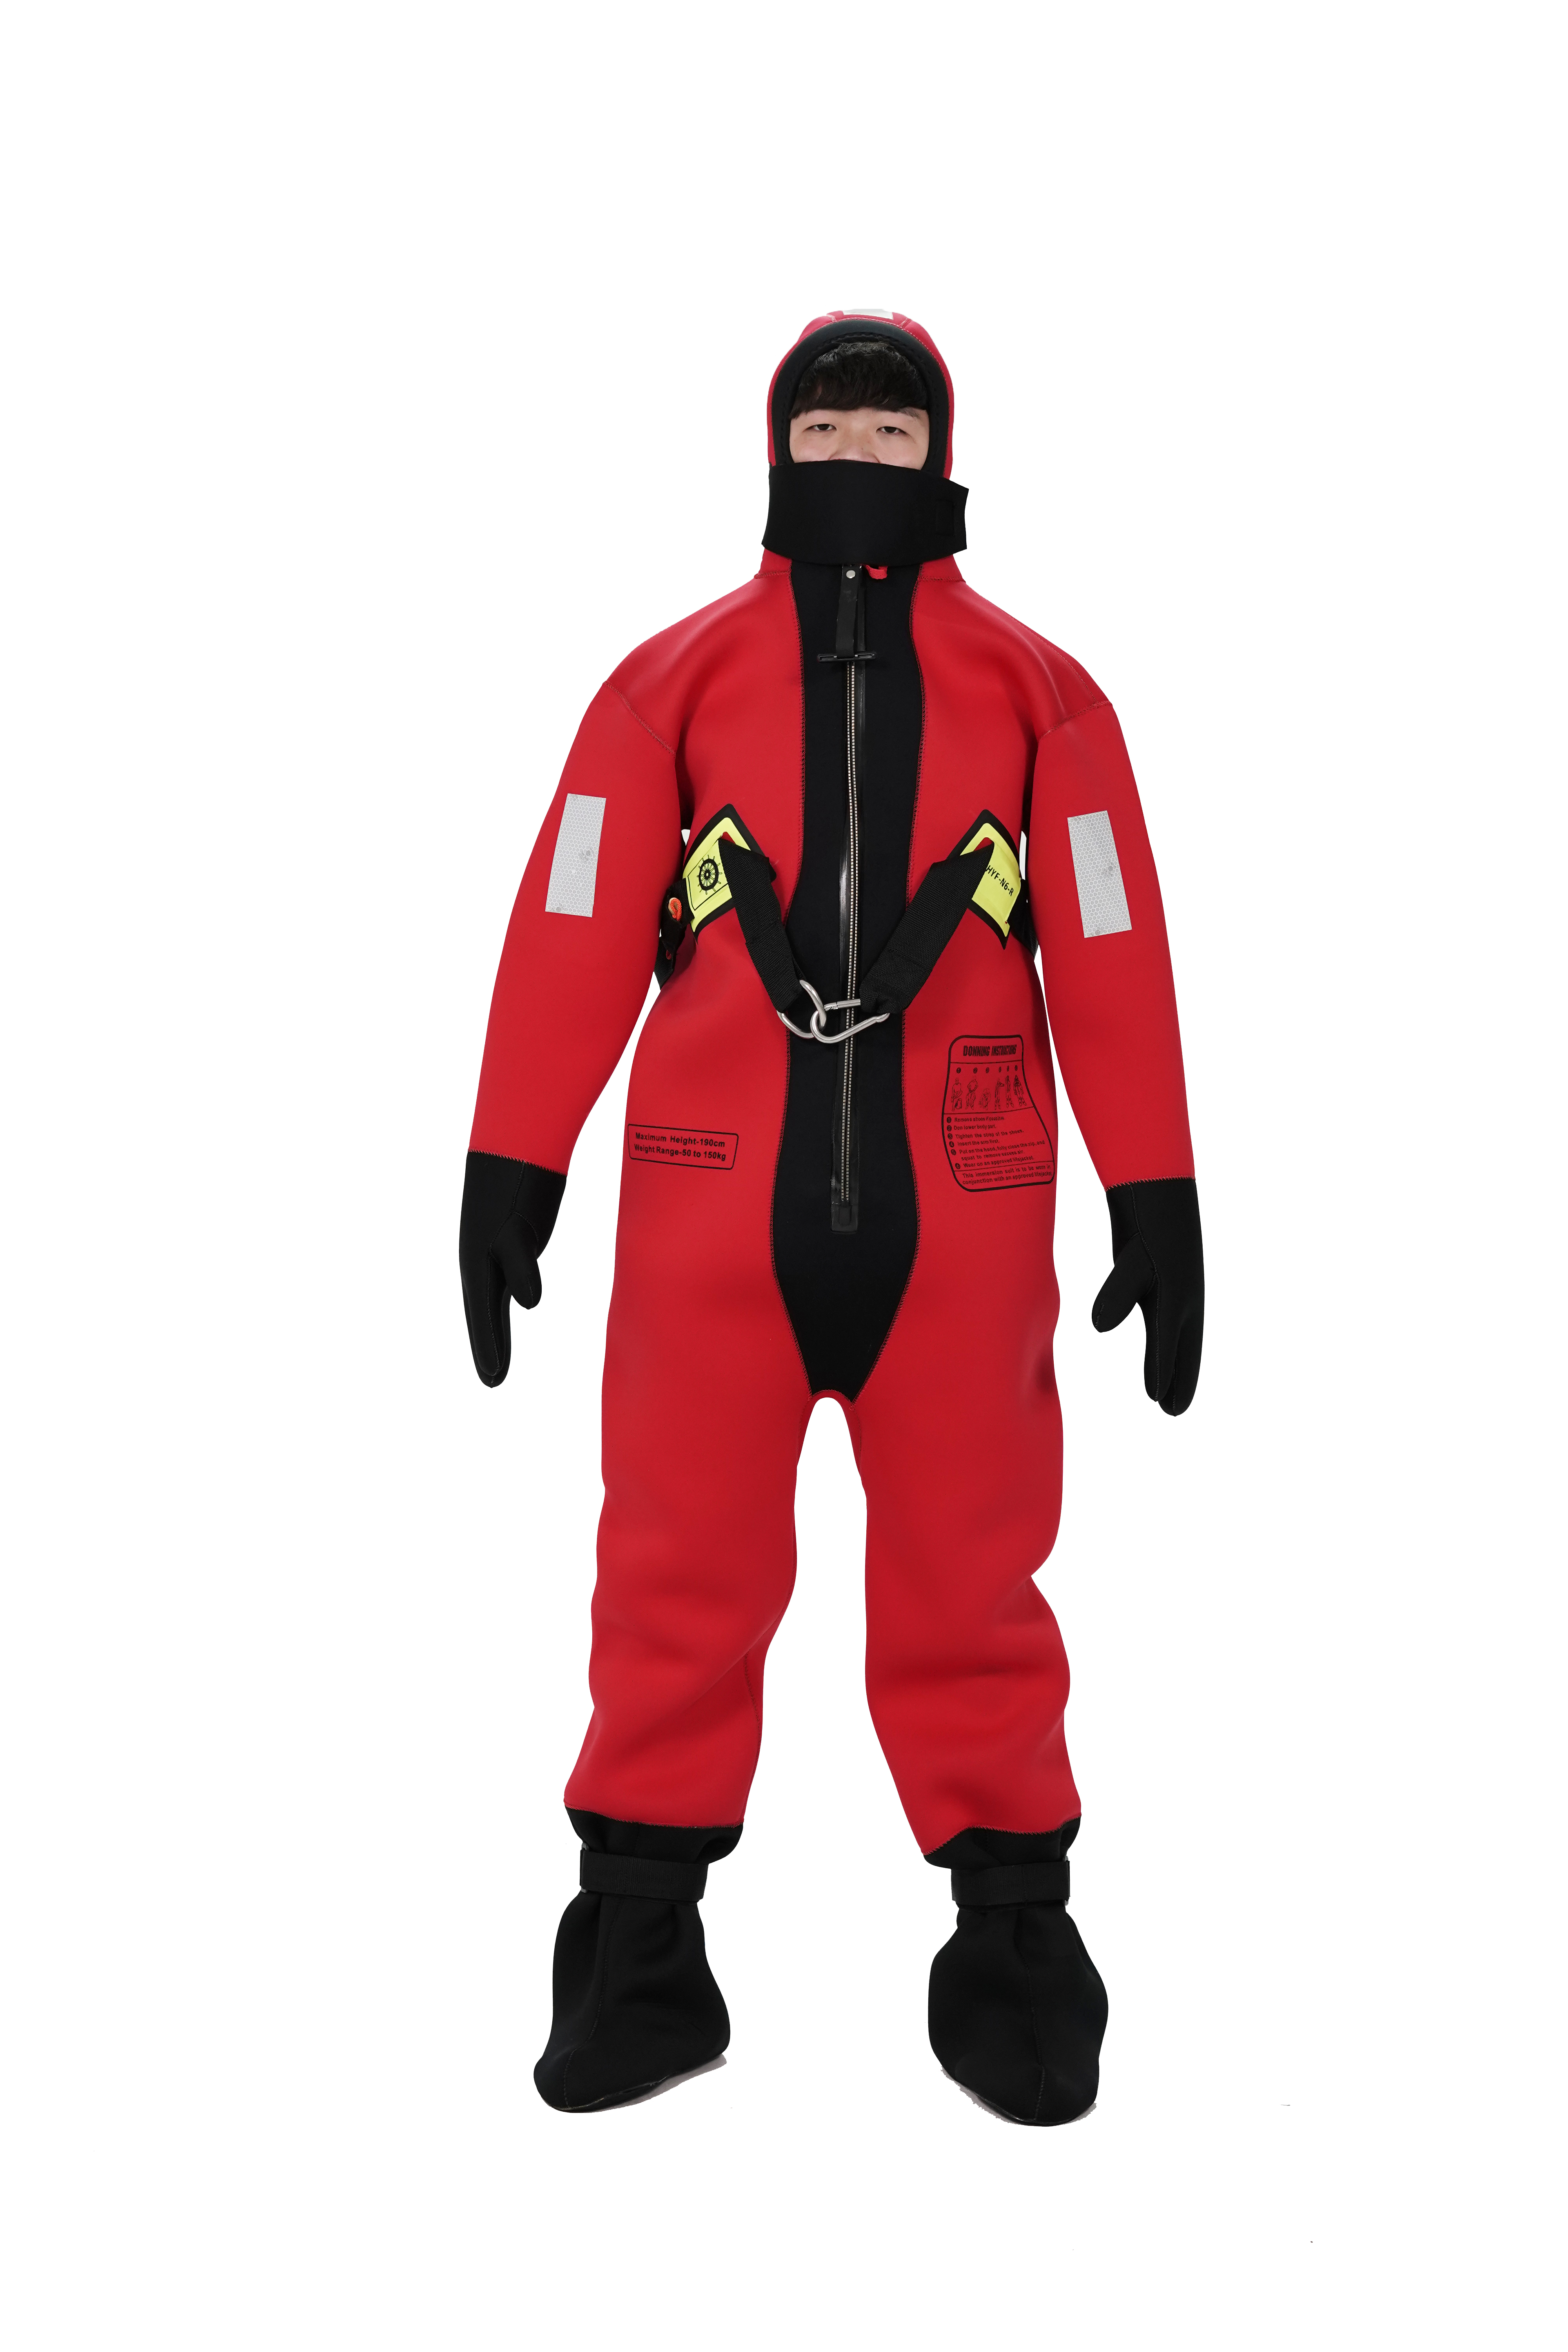 MER APPROVED INSULATED IMMERSION SUIT HYF-6-R/Y/RG